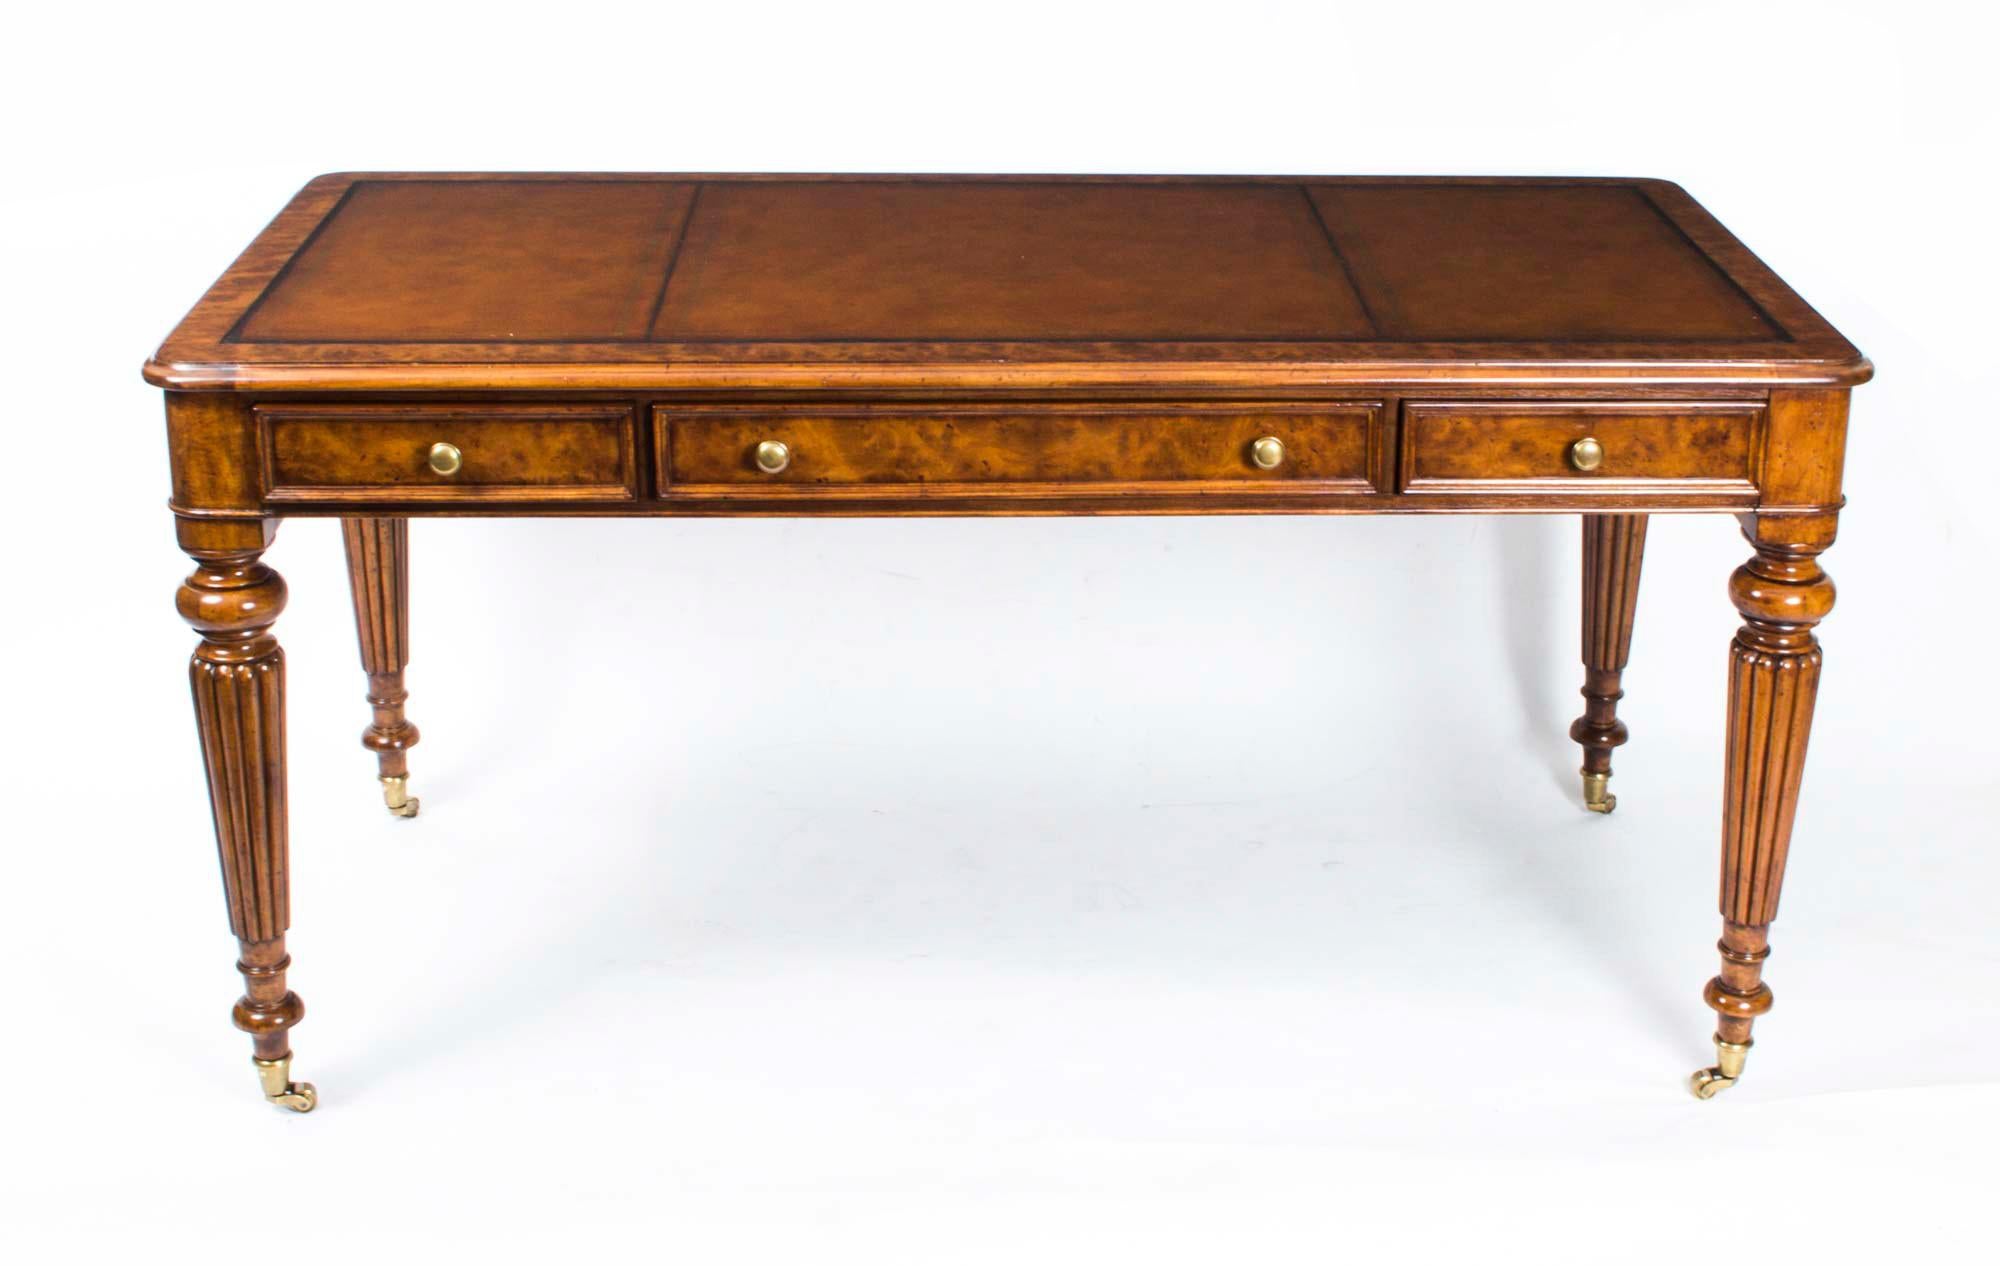 This is a sublime vintage burr walnut writing table in the manner of Gillows dating from the late 20th century.

This elegant desk will make a wonderful addition to one room in your home, it has been crafted from beautiful burr walnut and features